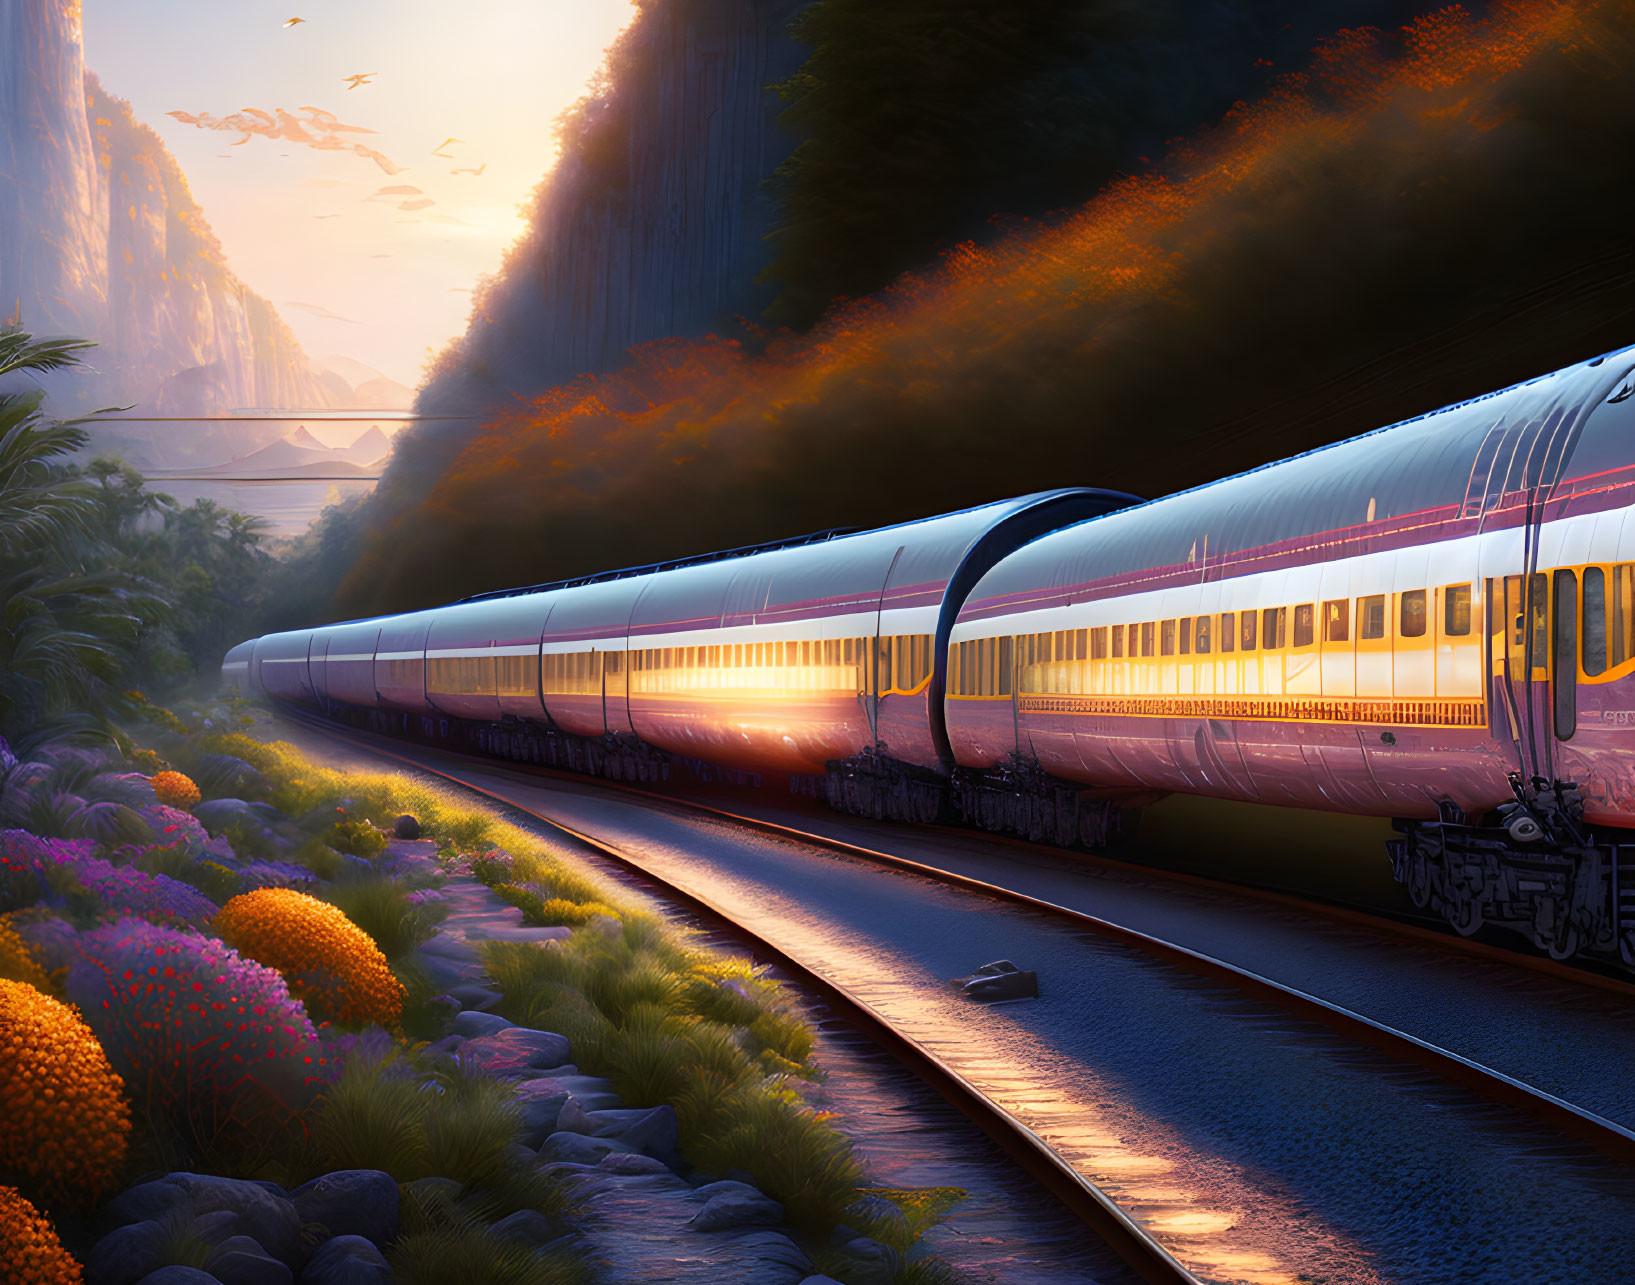 Futuristic train in lush valley at sunset with vibrant flowers and mountains.